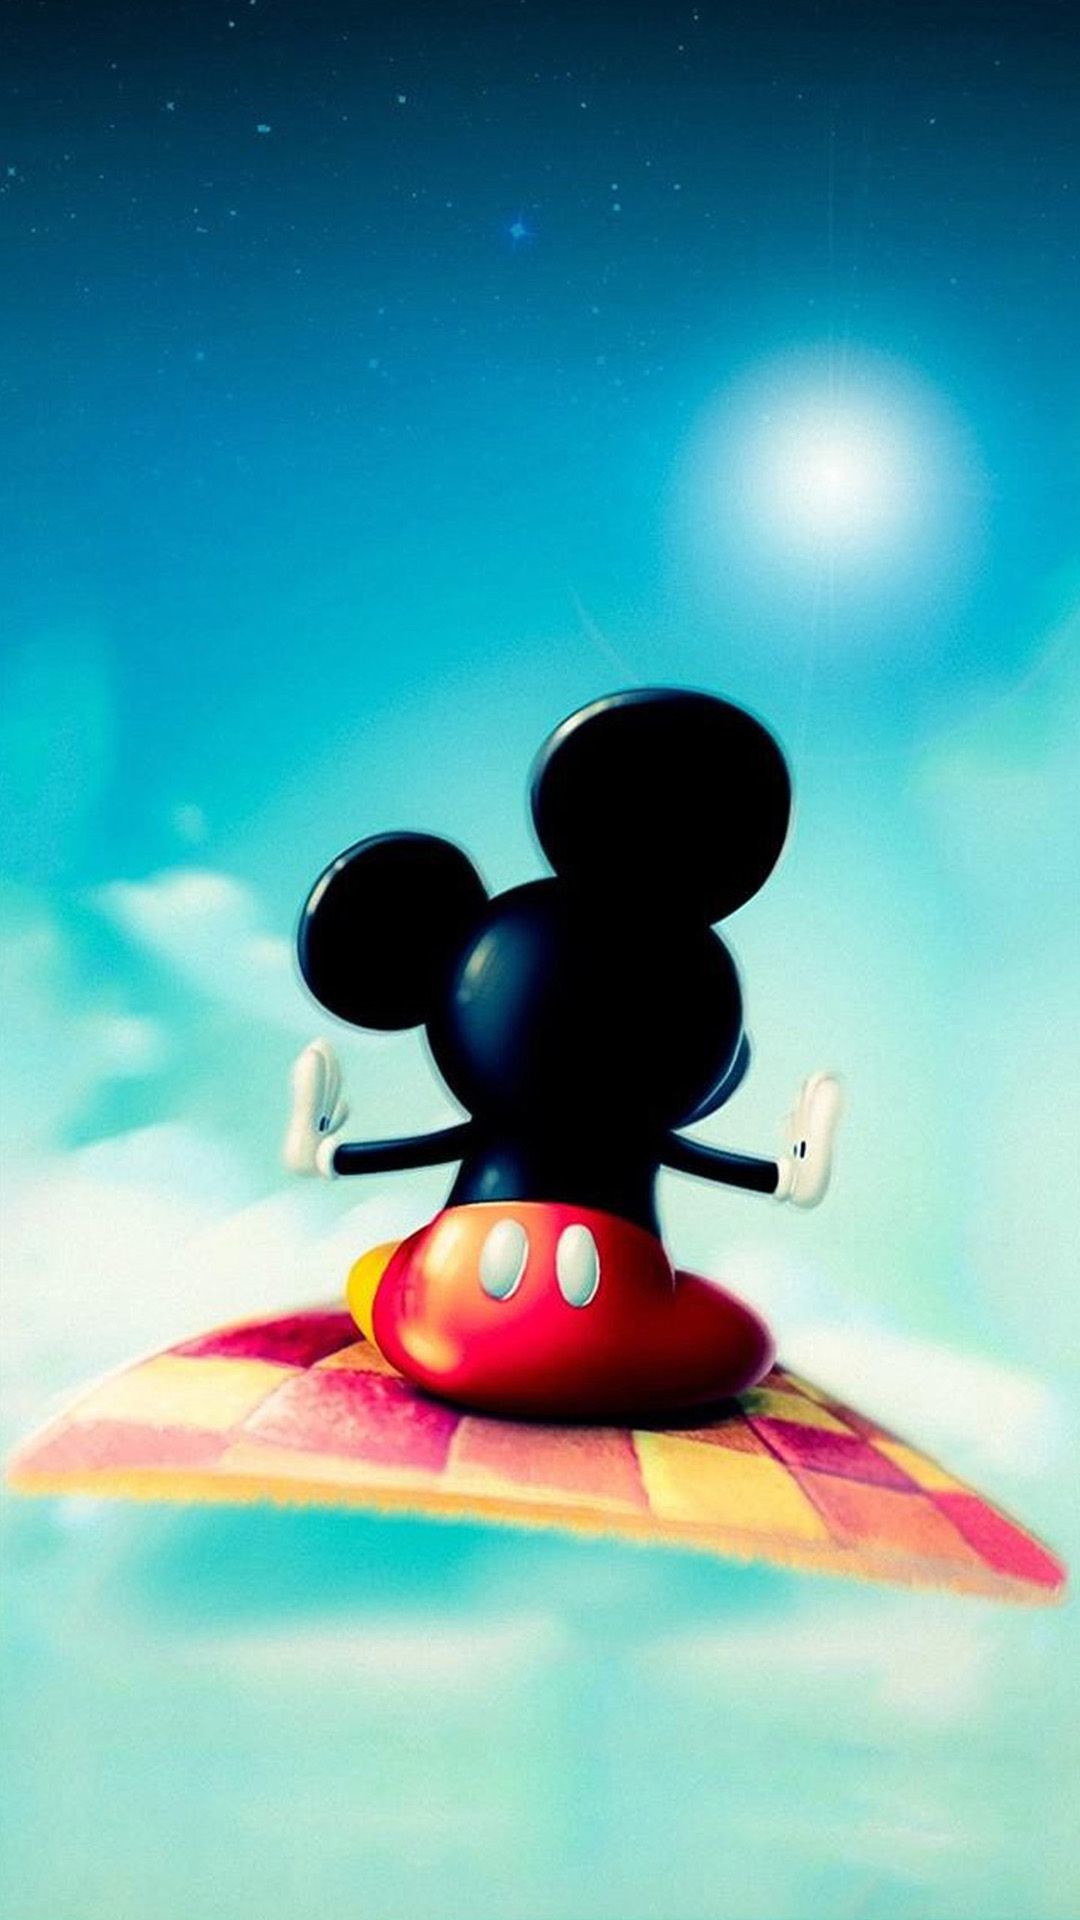 1080x1920 Cute Disney Wallpapers for iPhone